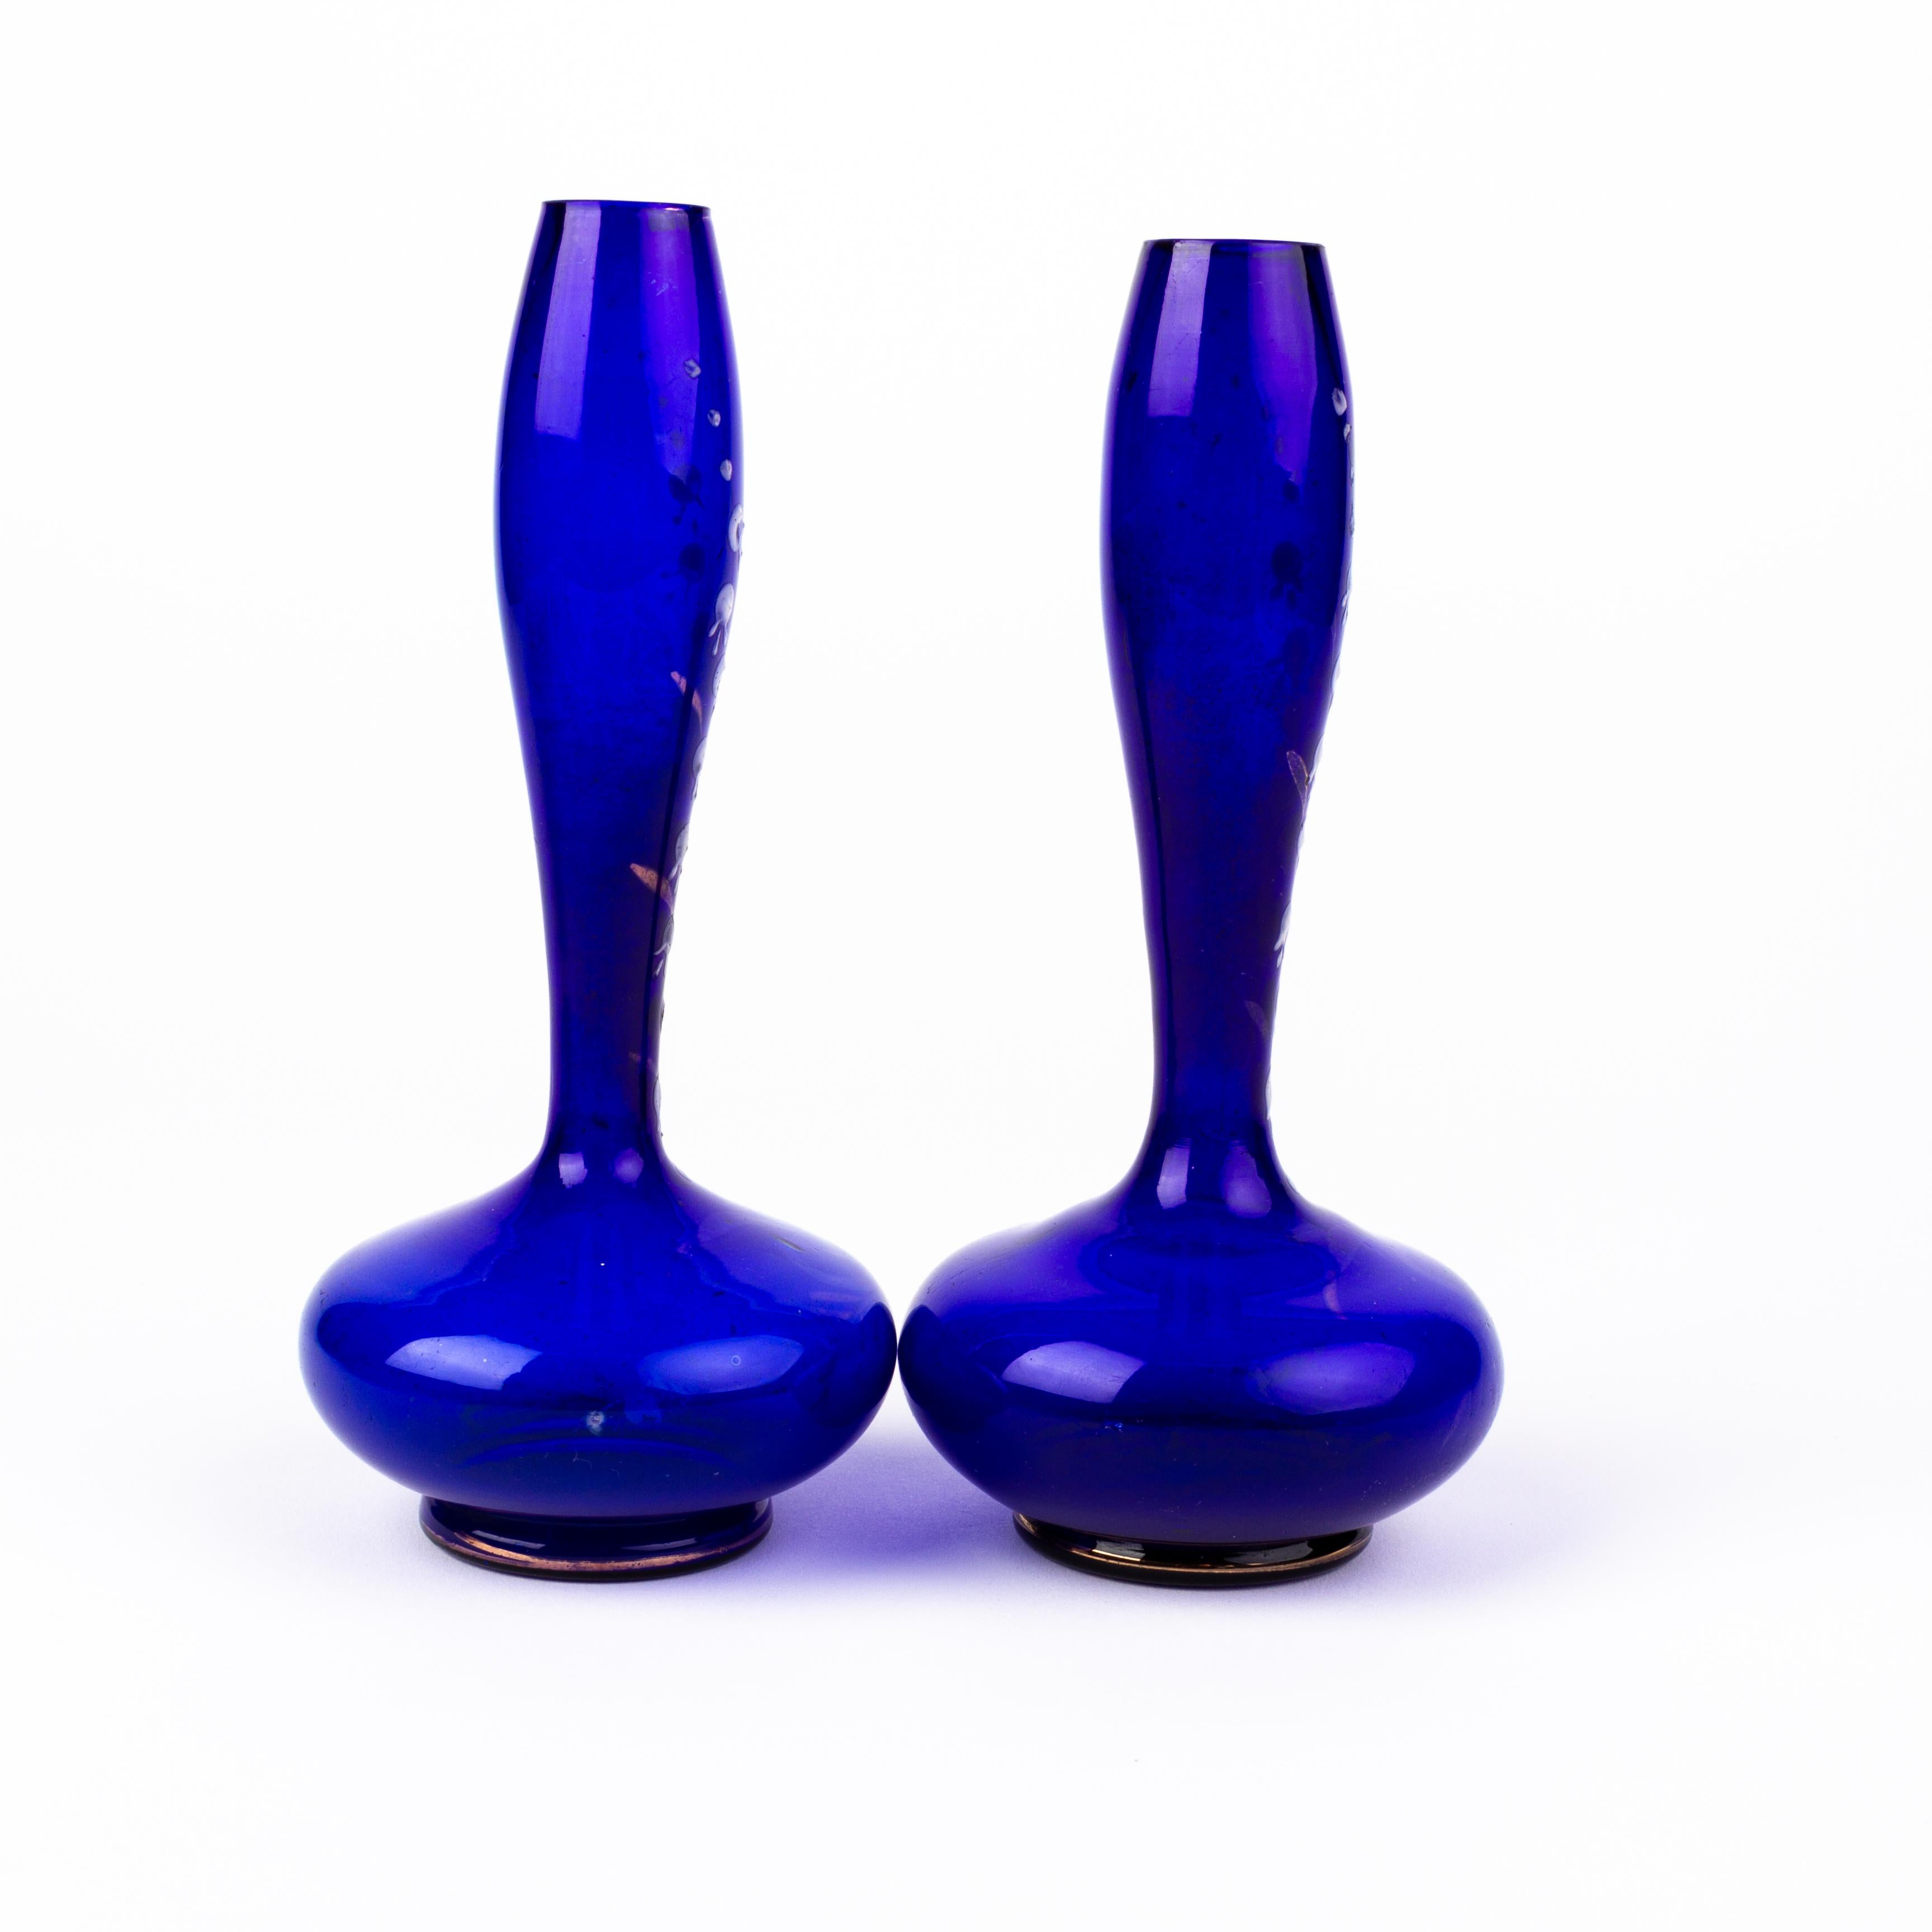 In good condition
From a private collection
Pair of Bristol Blue Enamel Painted Glass Art Nouveau Vases